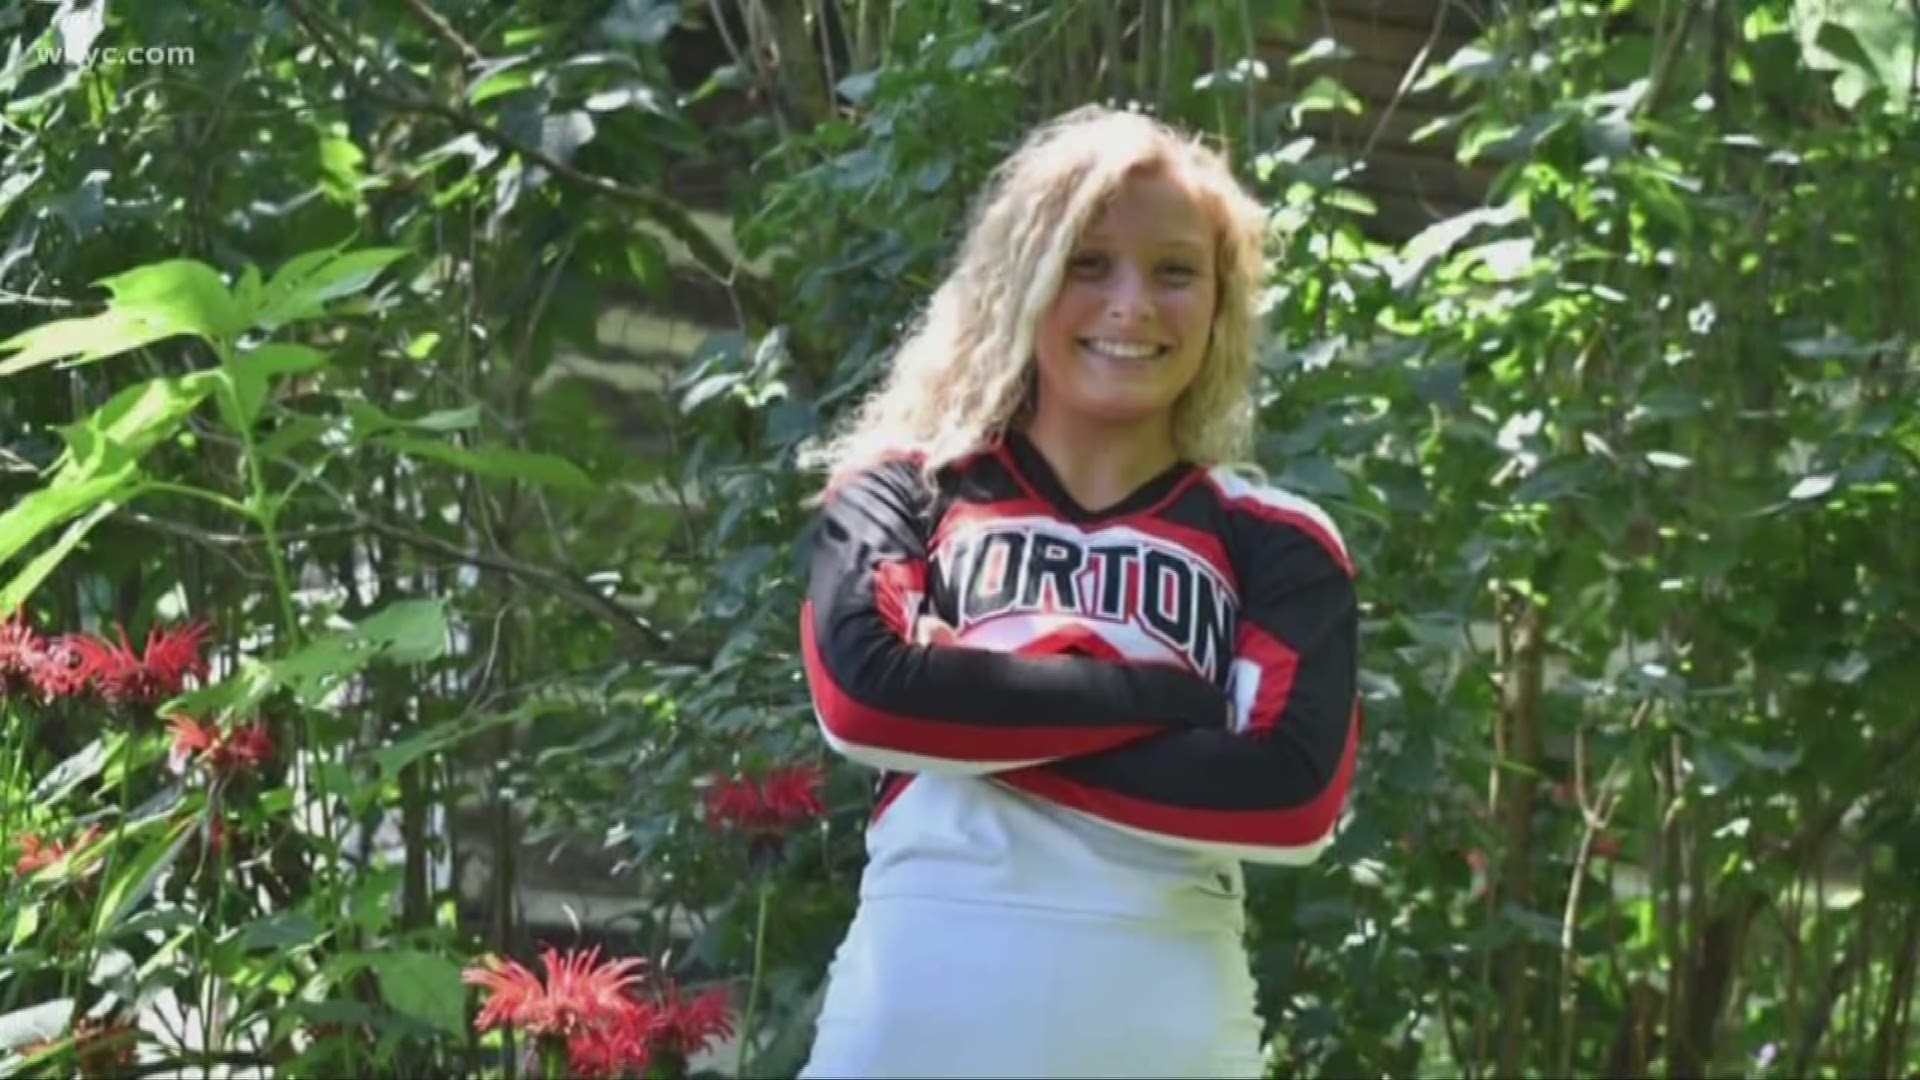 The 16-year-old cheerleader collapsed during the homecoming dance. Andrew Horansky reports.